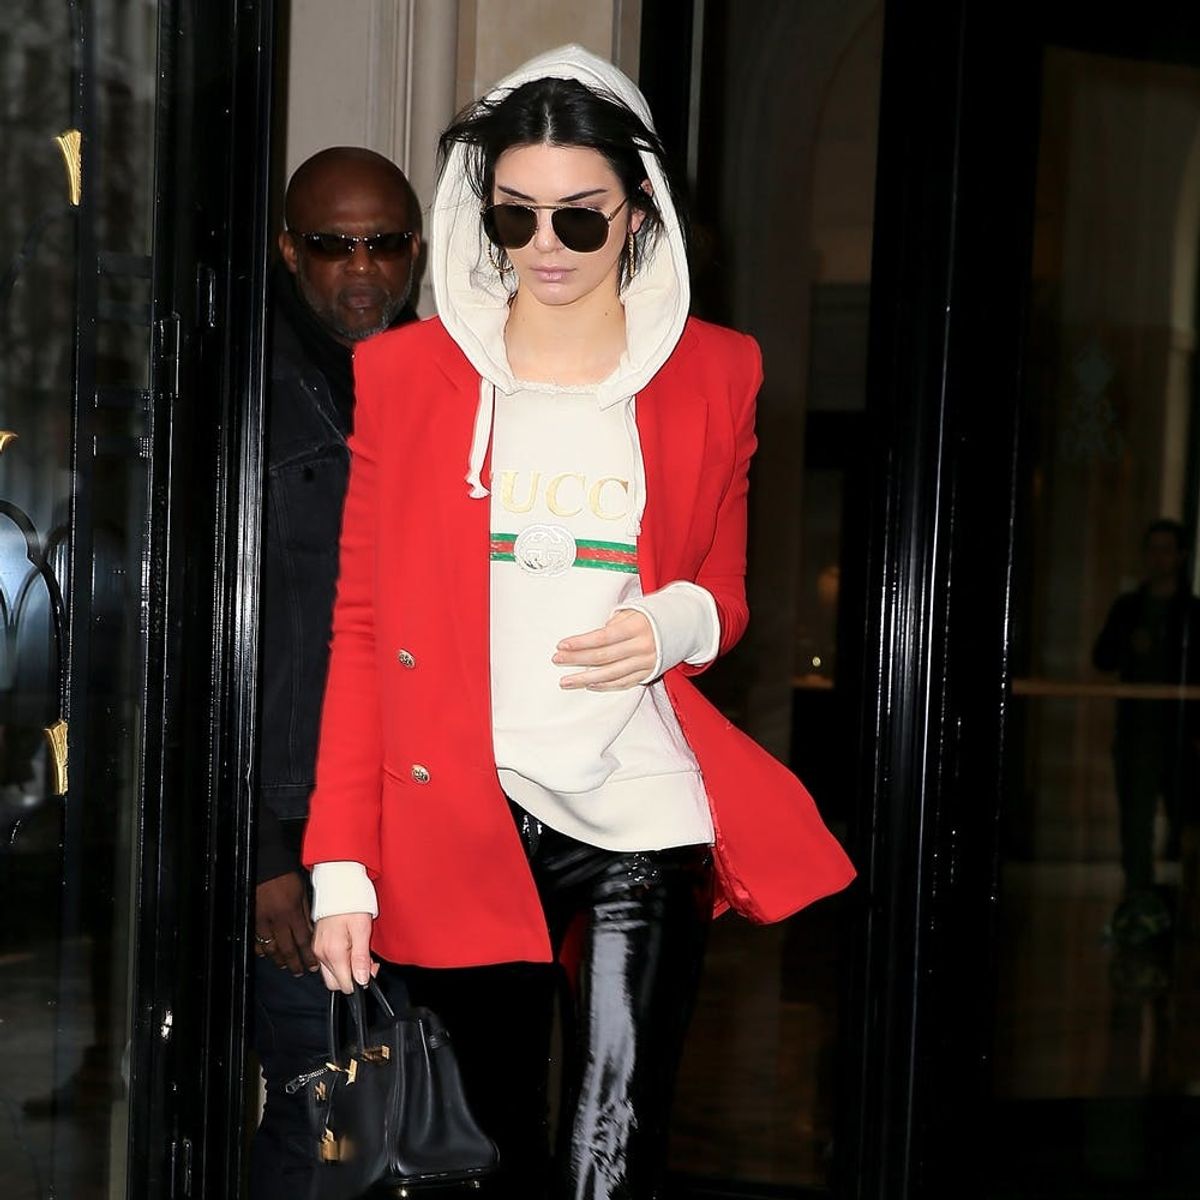 How to Wear a Sweatshirt to Work, According to Kendall Jenner